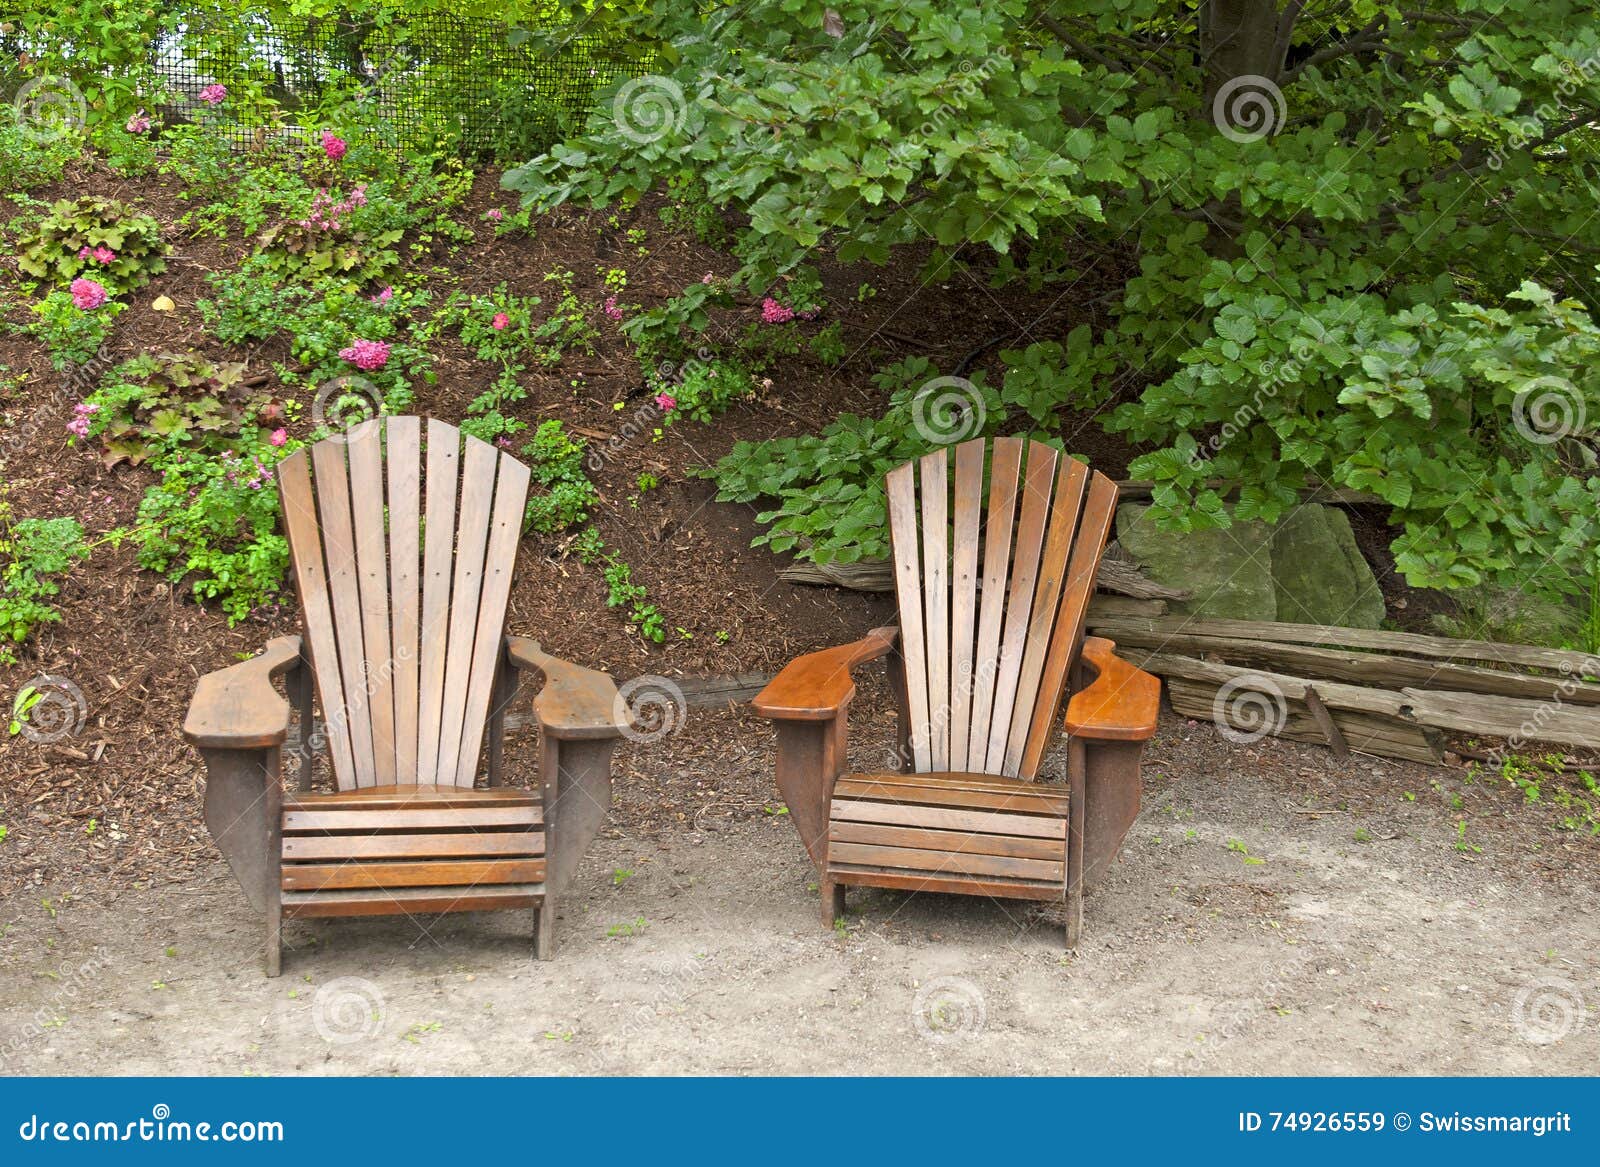 Two Inviting Wooden Lawn Chairs Stock Image Image Of Nature